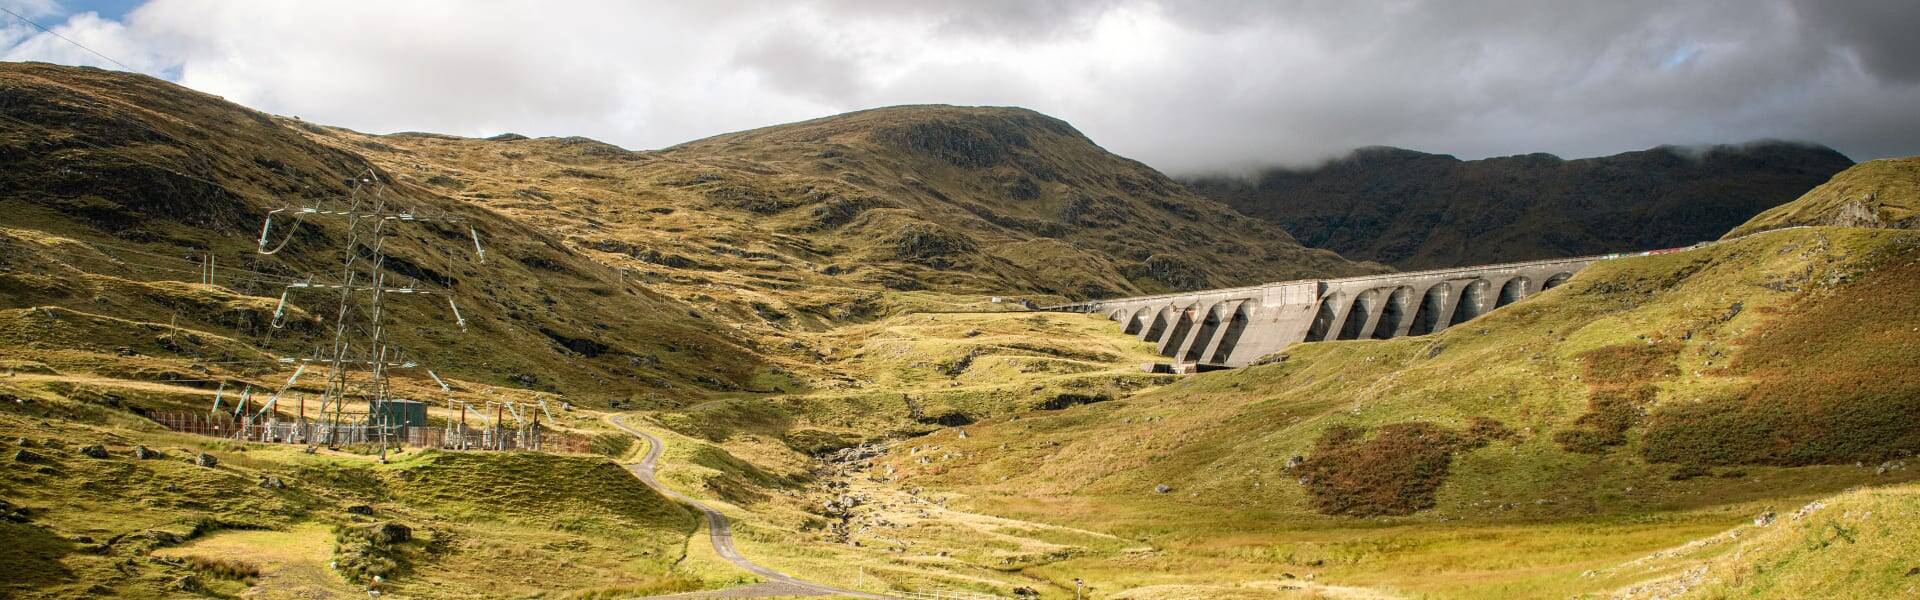 Drax gets green light for pumped storage hydro plant